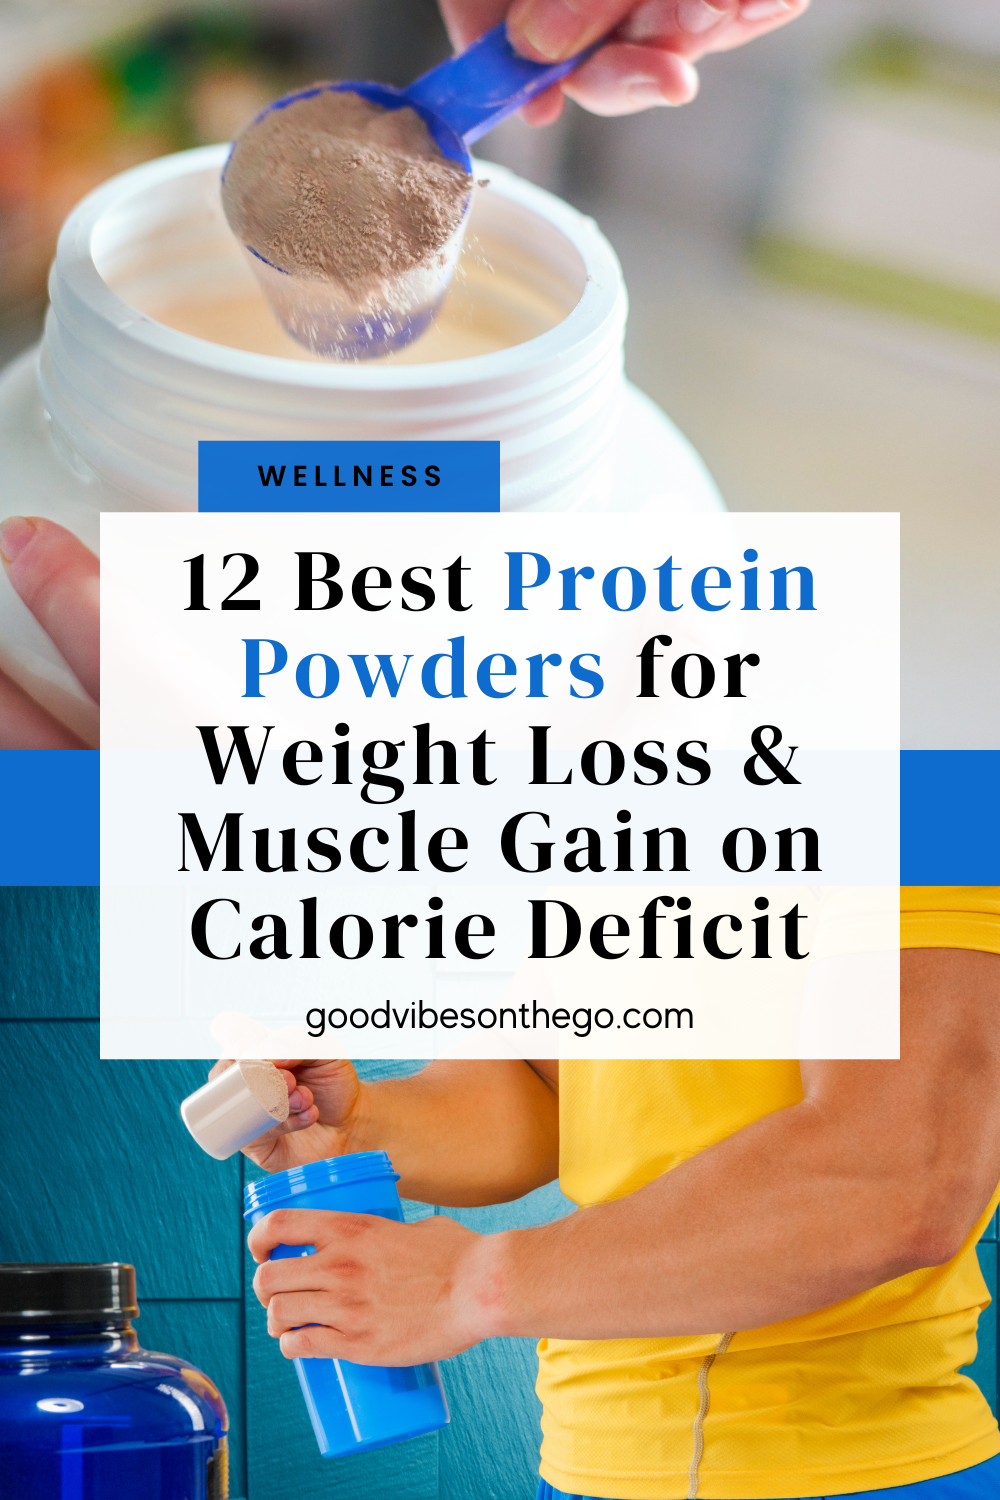 12 BEST PROTEIN POWDERS FOR WEIGHT LOSS & MUSCLE GAIN ON CALORIE DEFICIT